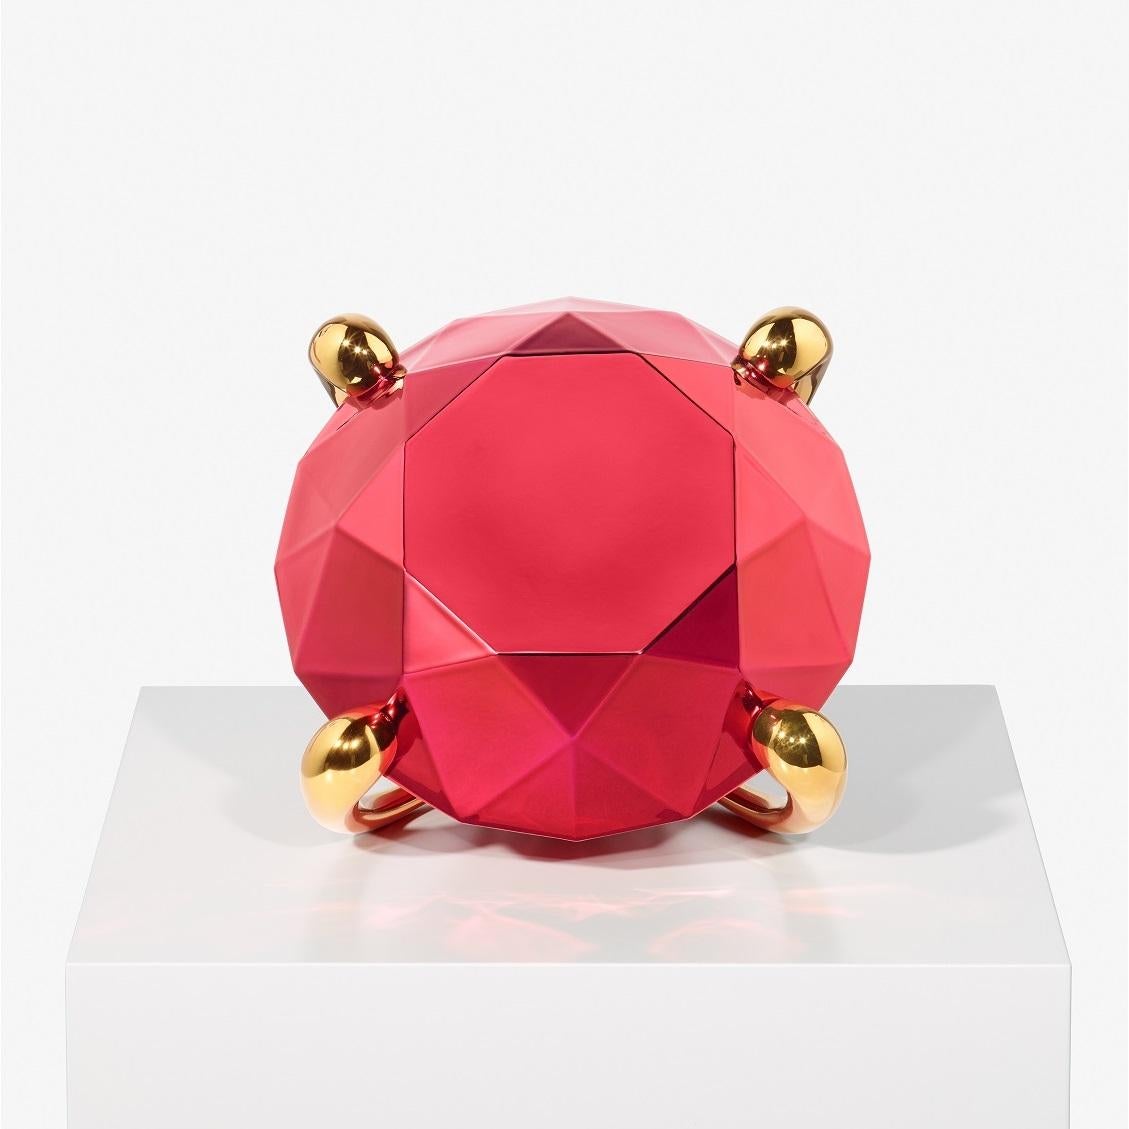 Red Diamond Sculpture by Jeff Koons, Porcelaine, Objects for Objects, Contemporary Art